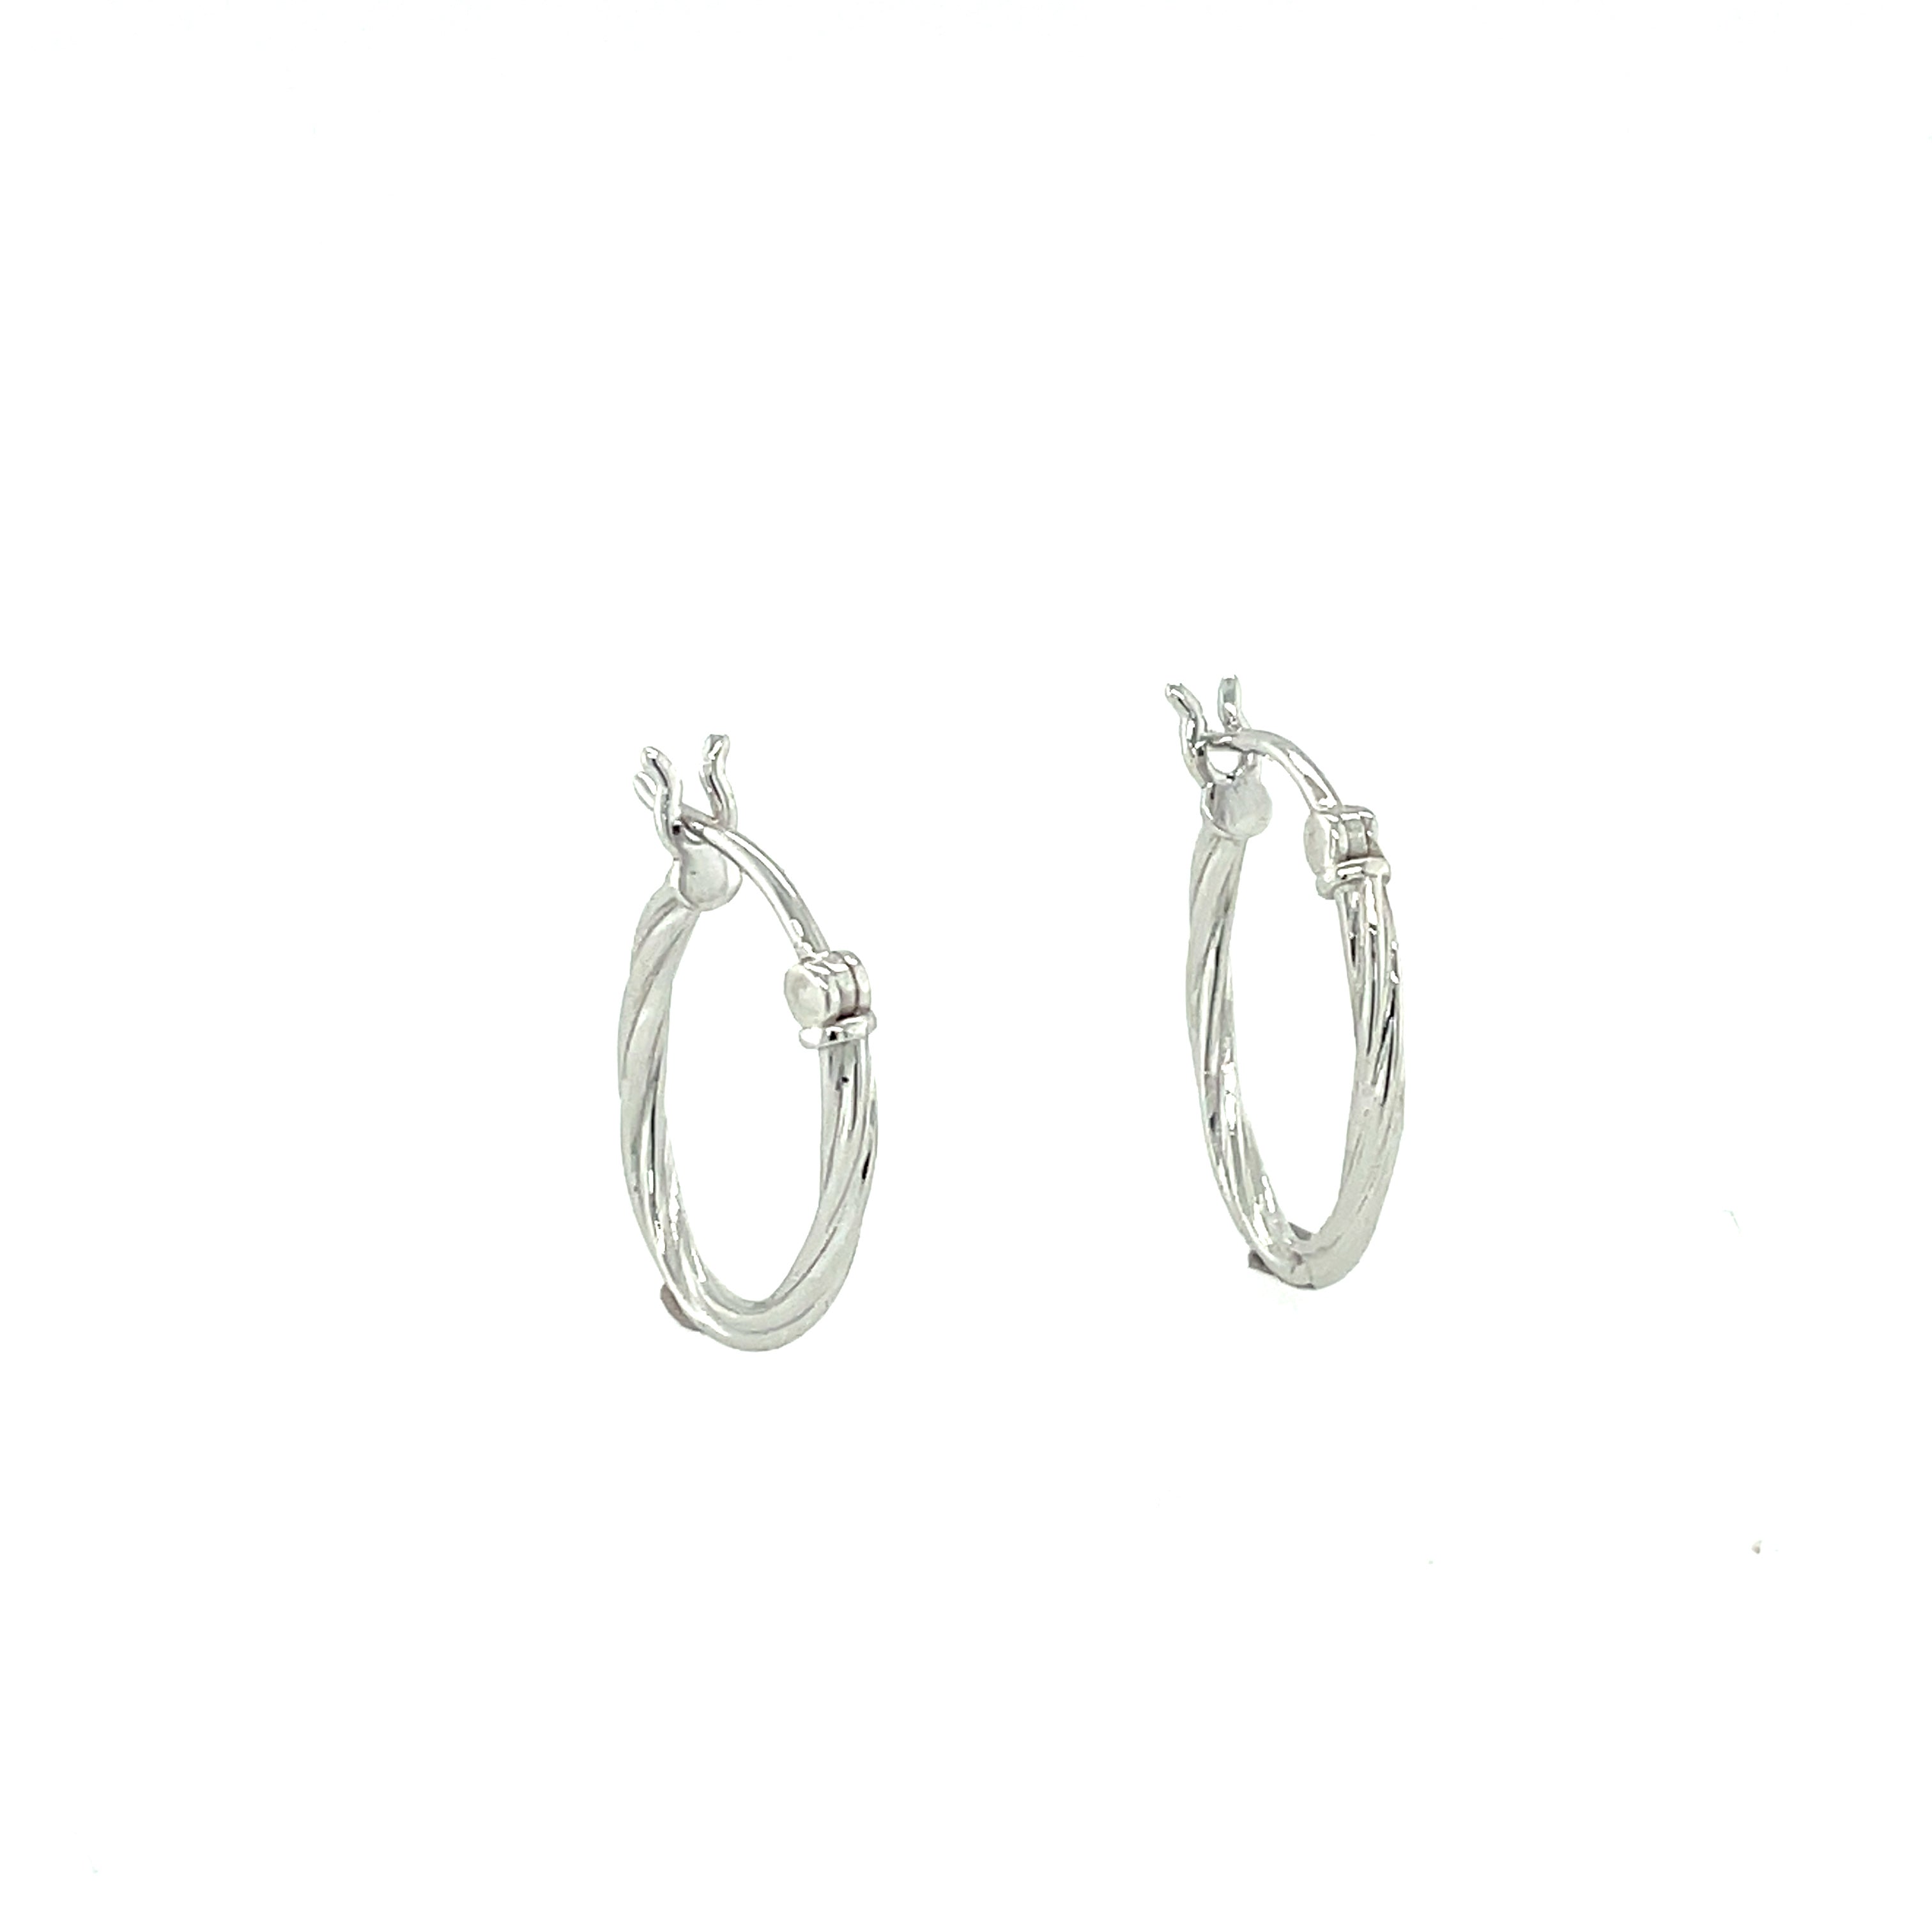 Silver Hoop Earrings - MJ024 - Hallmark Jewellers Formby & The Jewellers Bench Widnes